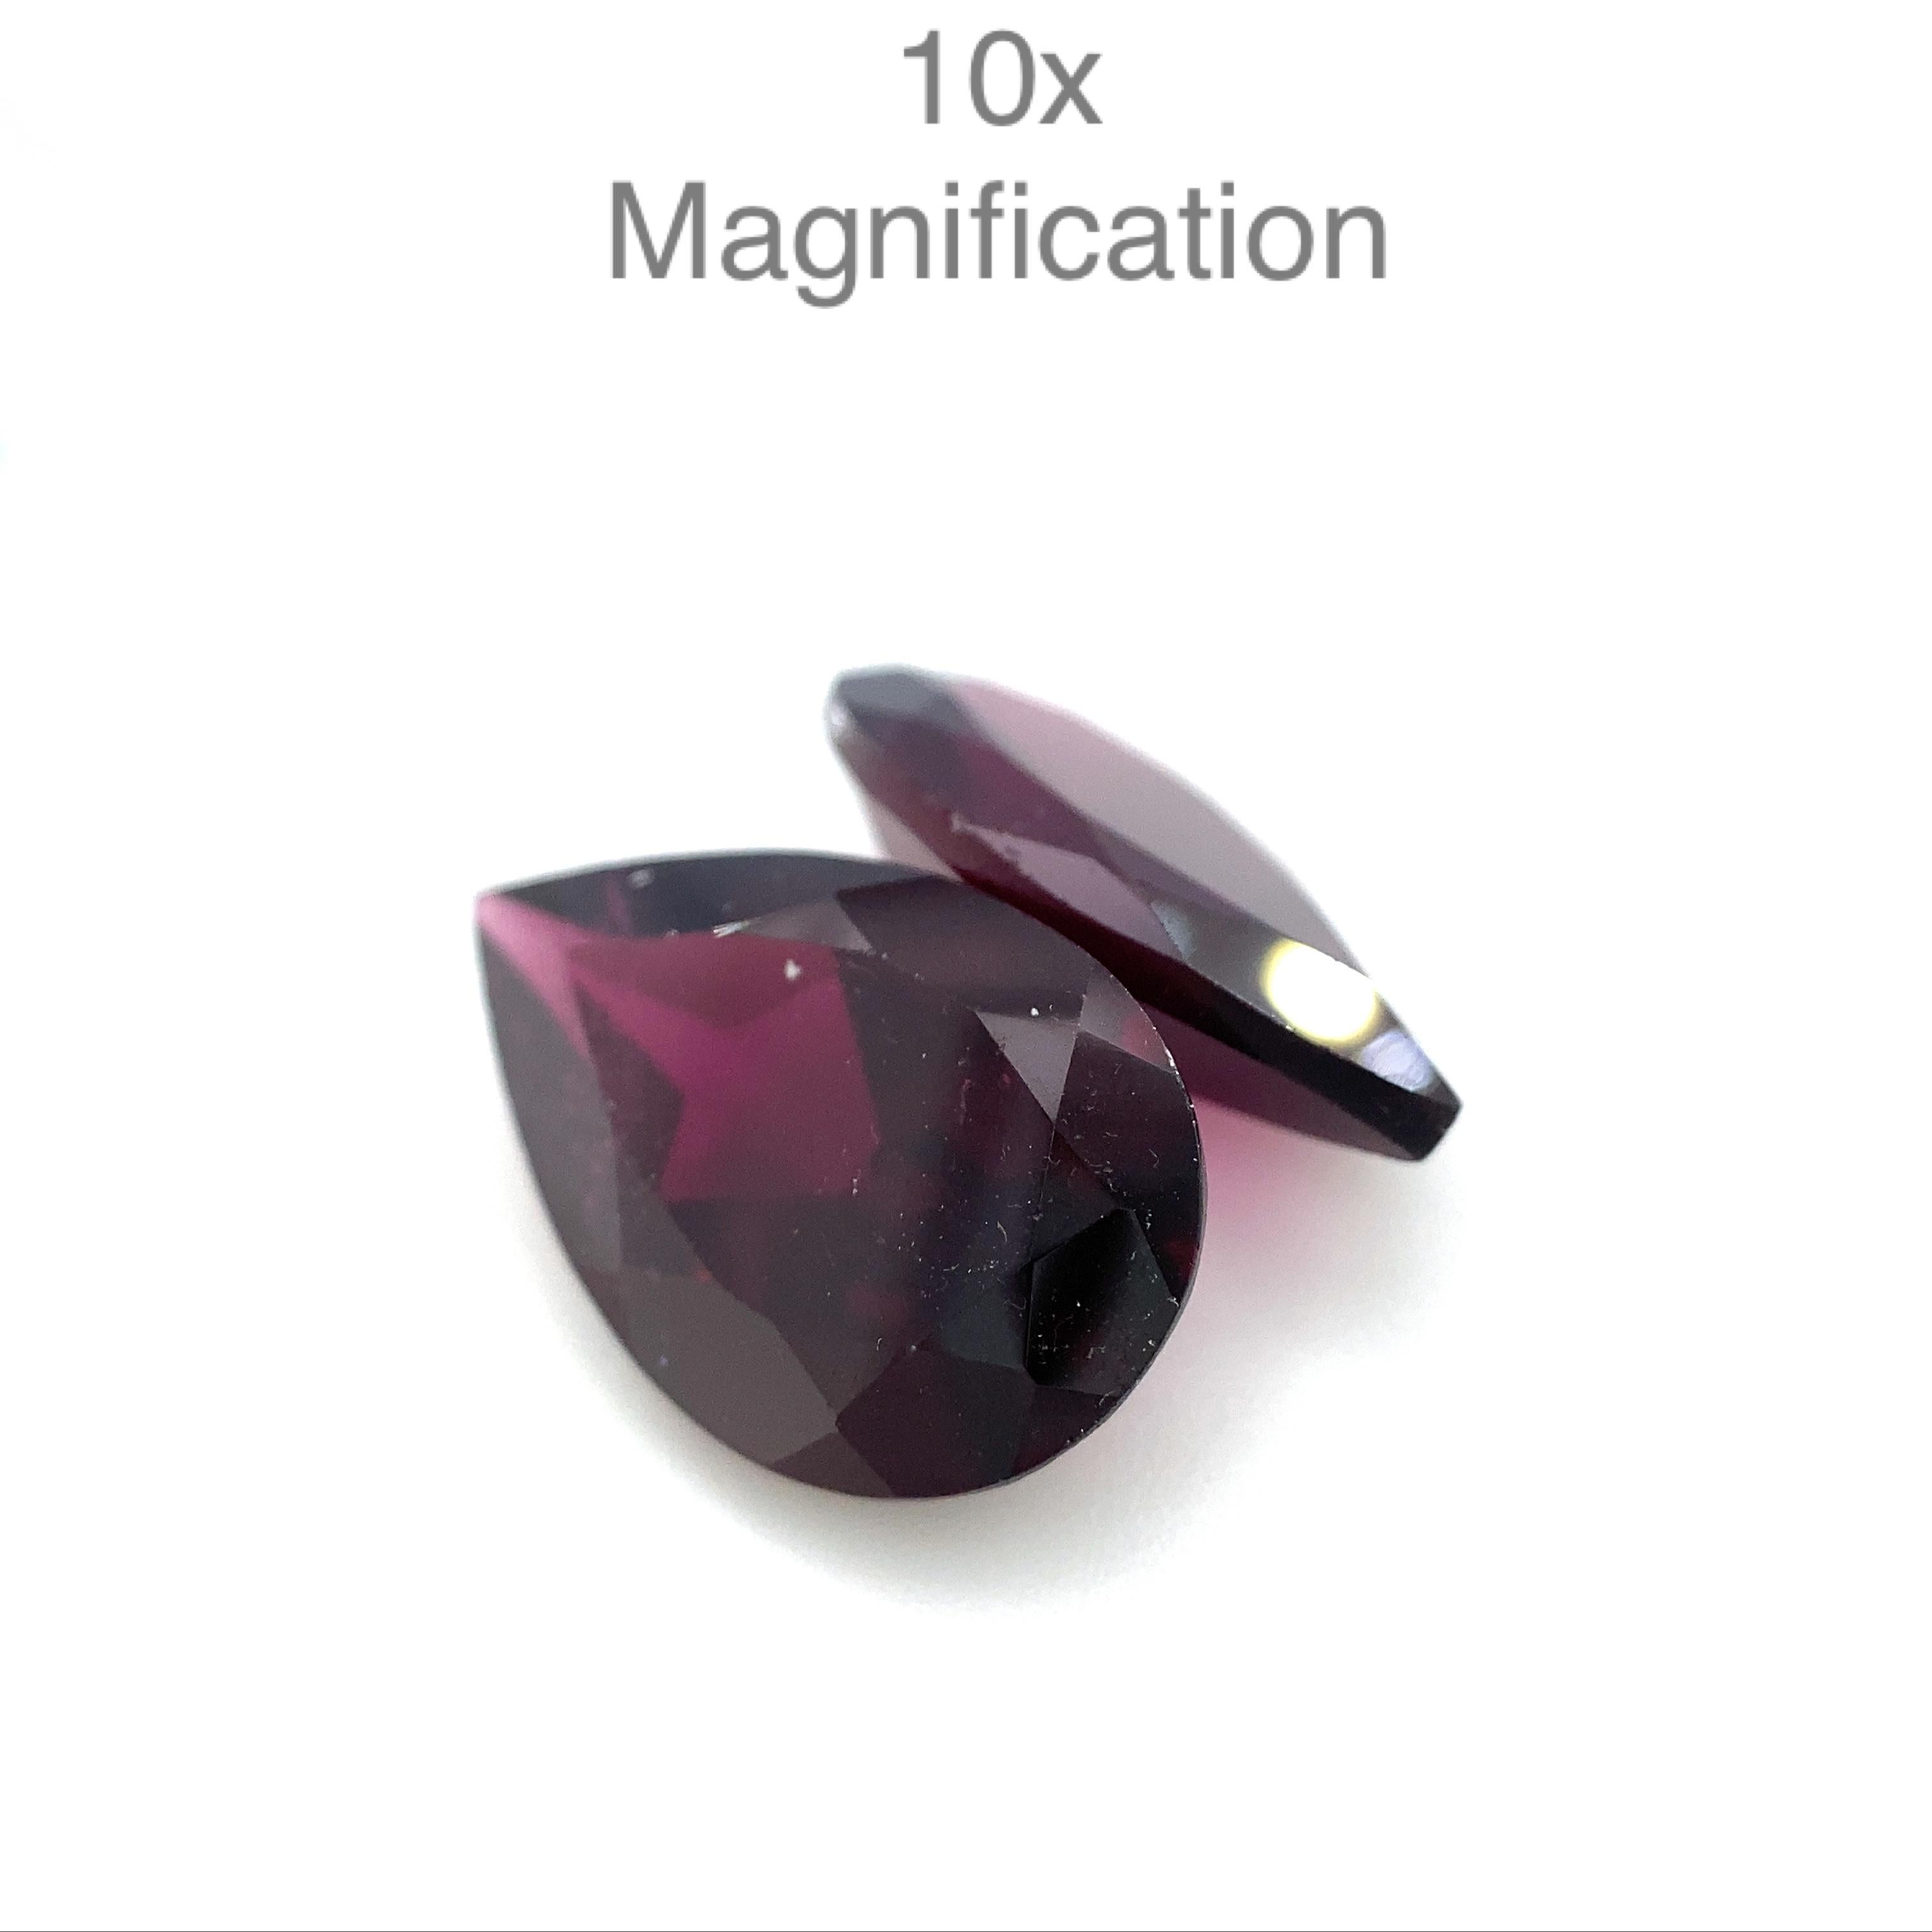 Description:

 

Gem Type: Rhodolite Garnet
Number of Stones: 2
Weight: 9.44 cts
Measurements: 14.00x9.00x5.2.00 mm
Shape: Pear
Cutting Style Crown: Modified Brilliant Cut
Cutting Style Pavilion: Brilliant
Transparency: Transparent
Clarity: Very